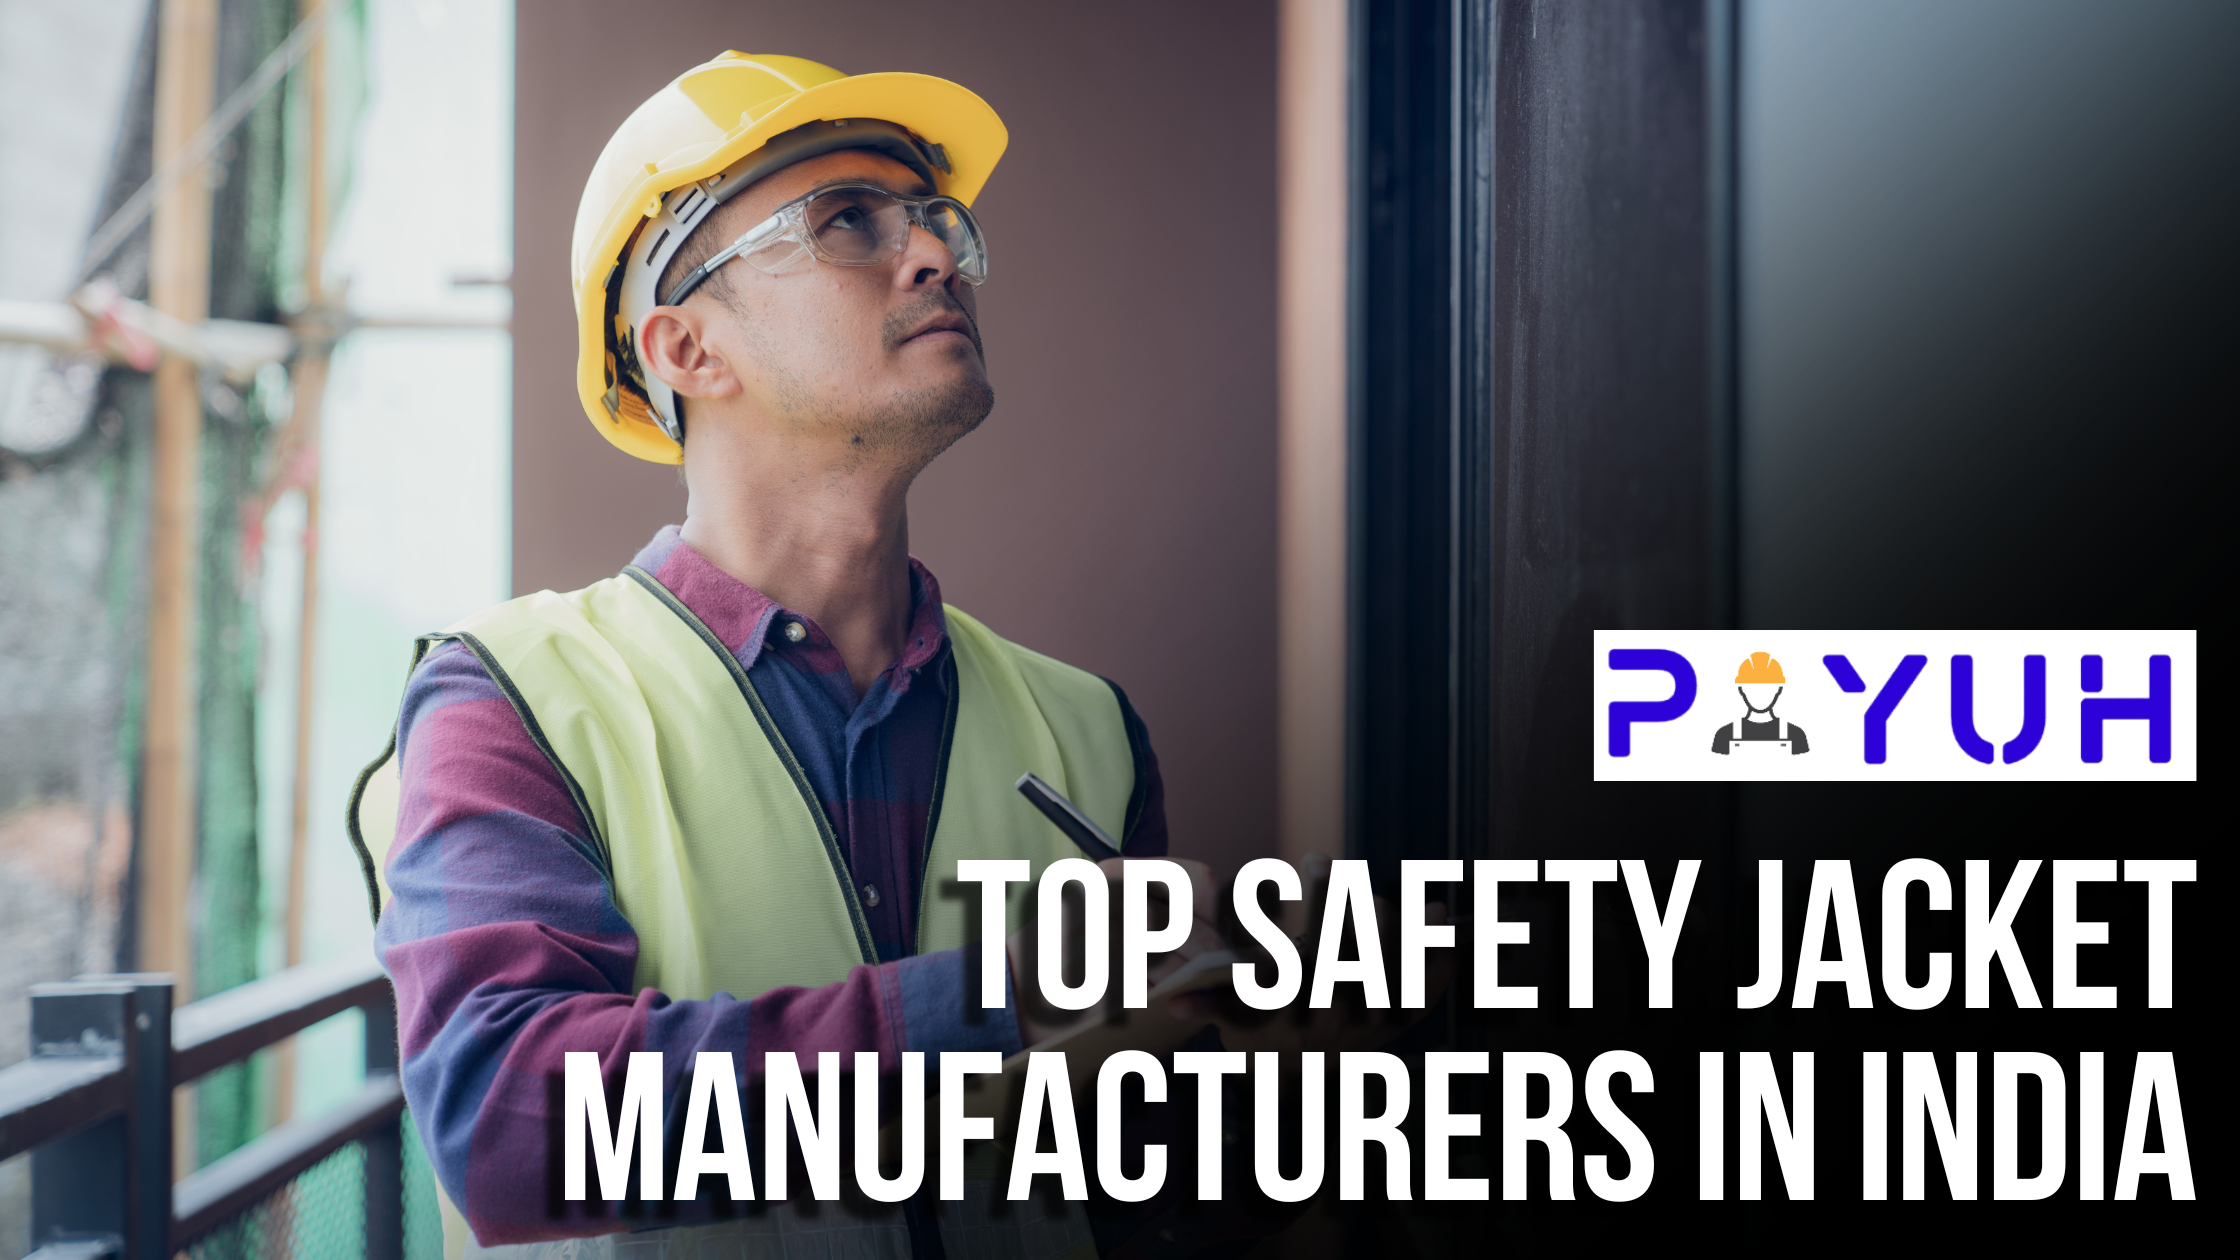 Top Safety Jacket Manufacturers in India